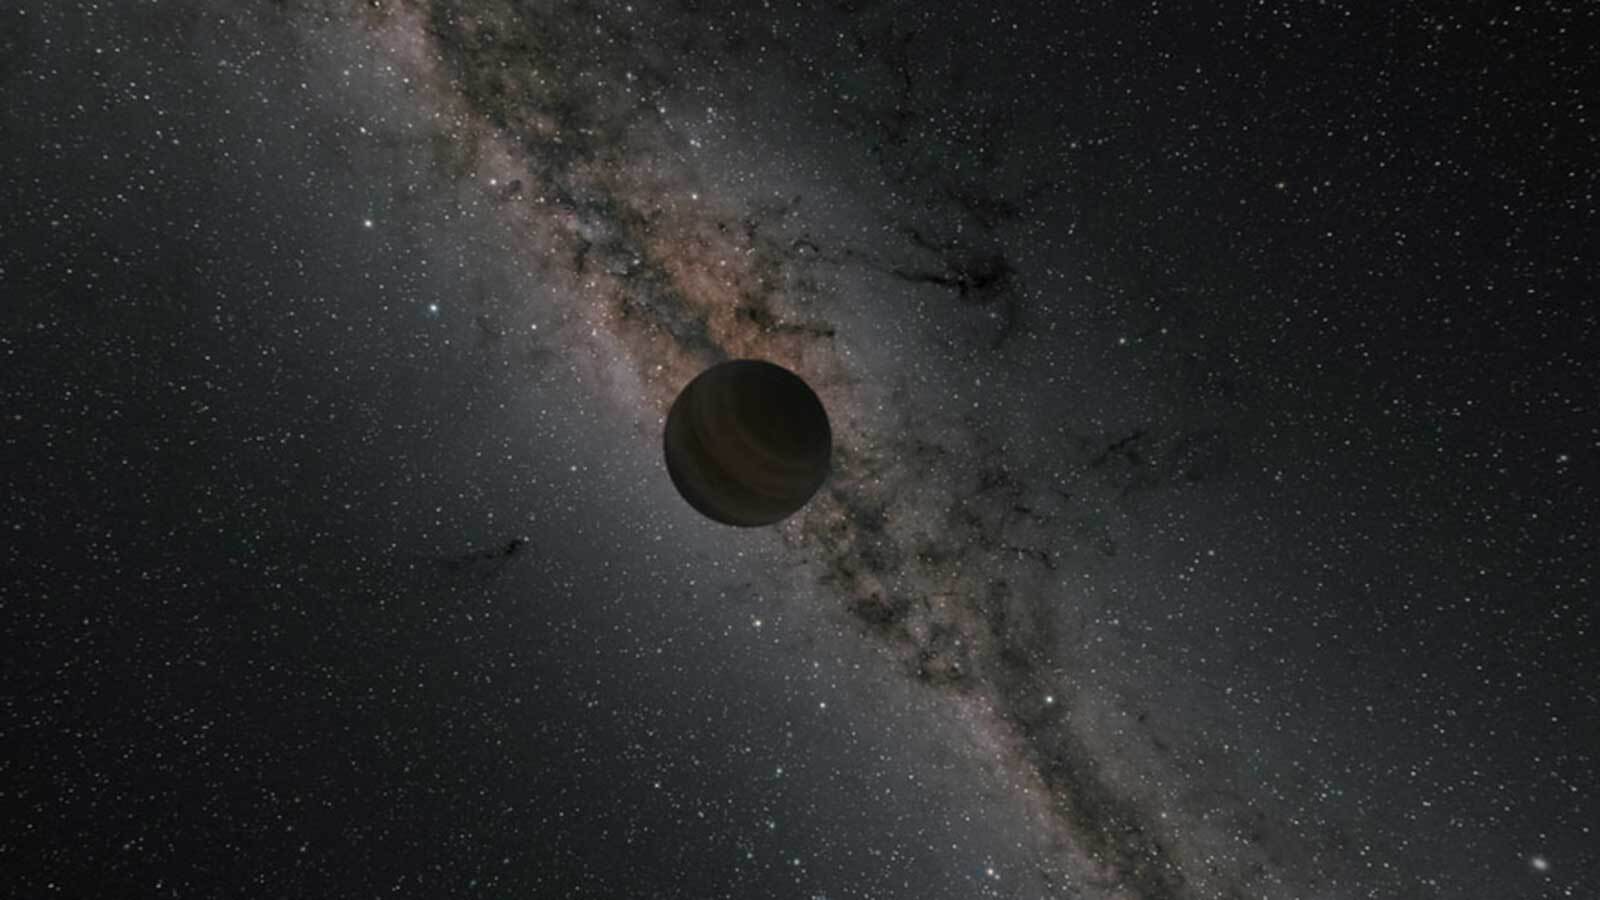 An artist's illustration of a rogue planet, dark and mysterious. Image Credit: NASA